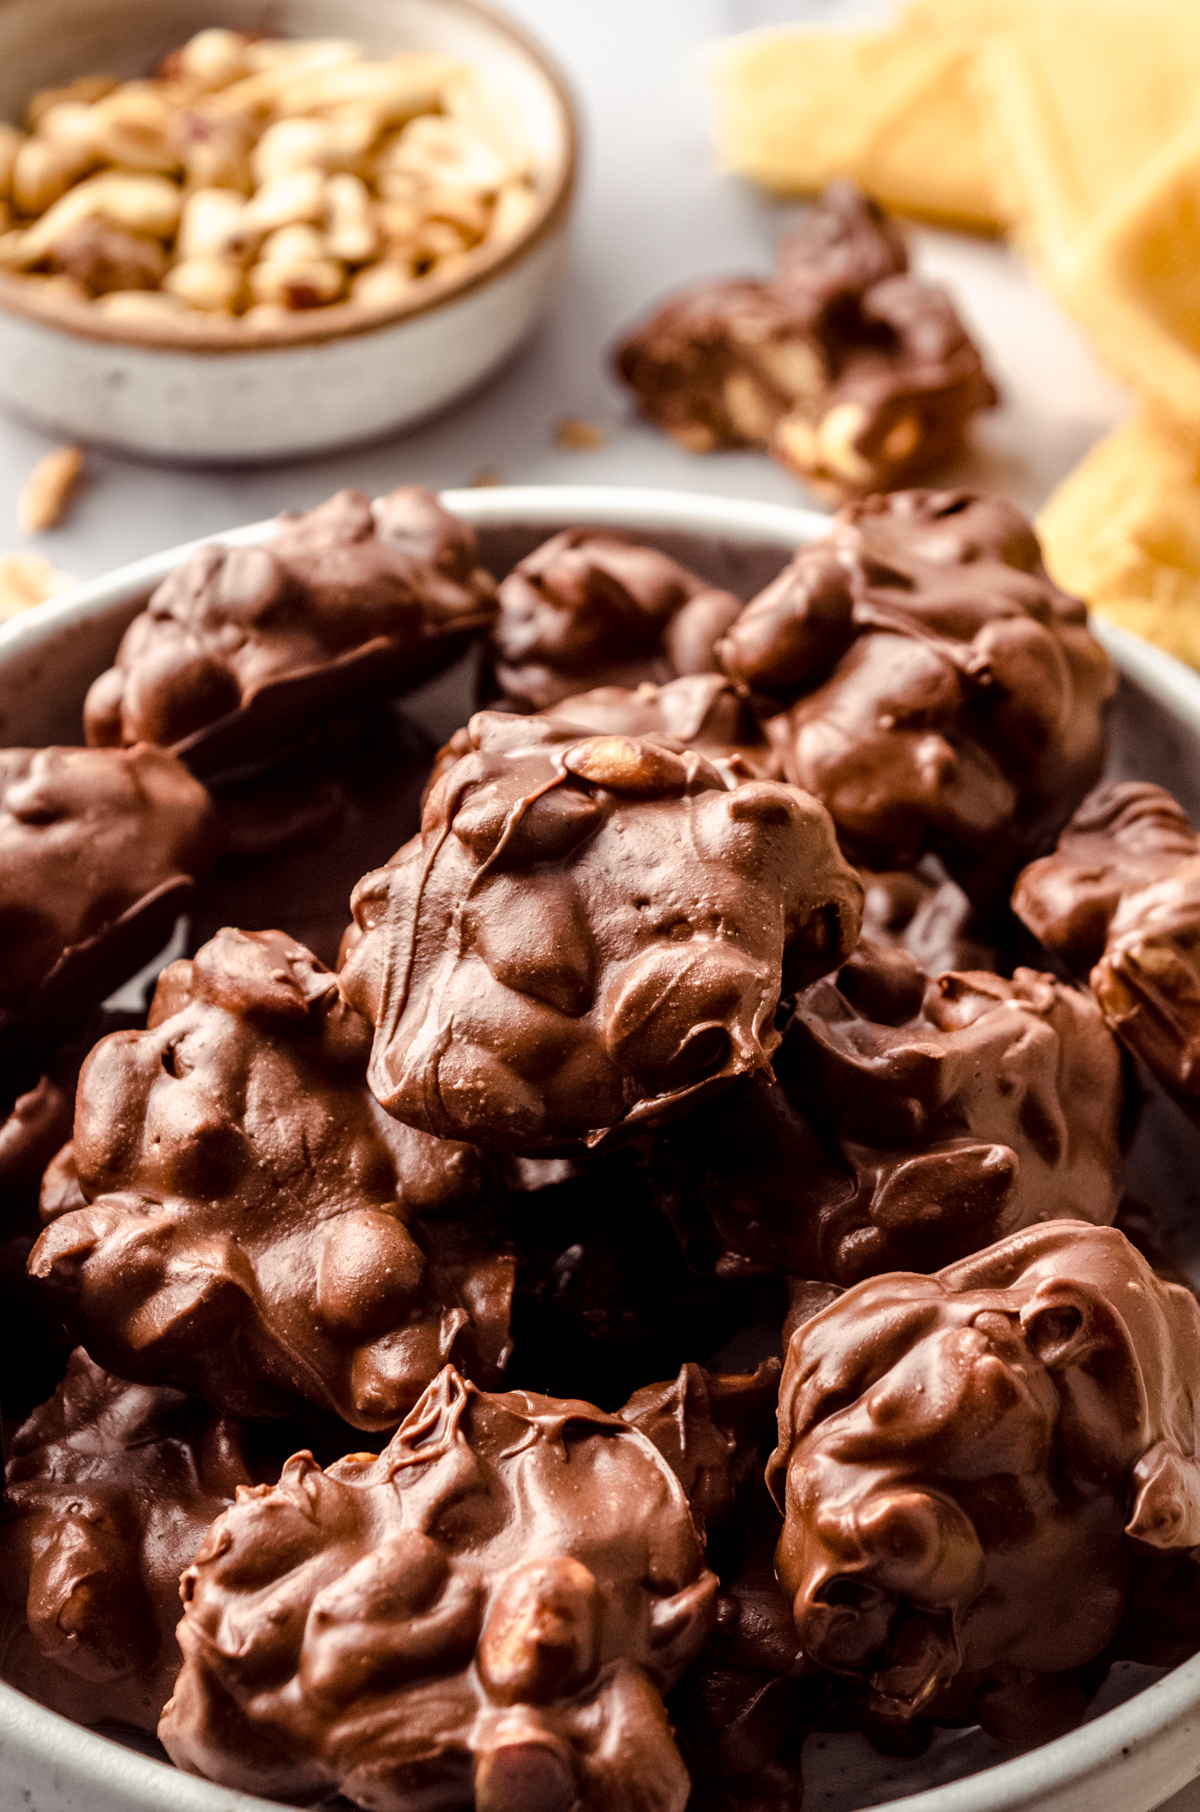 Slow cooker peanut clusters on a plate.